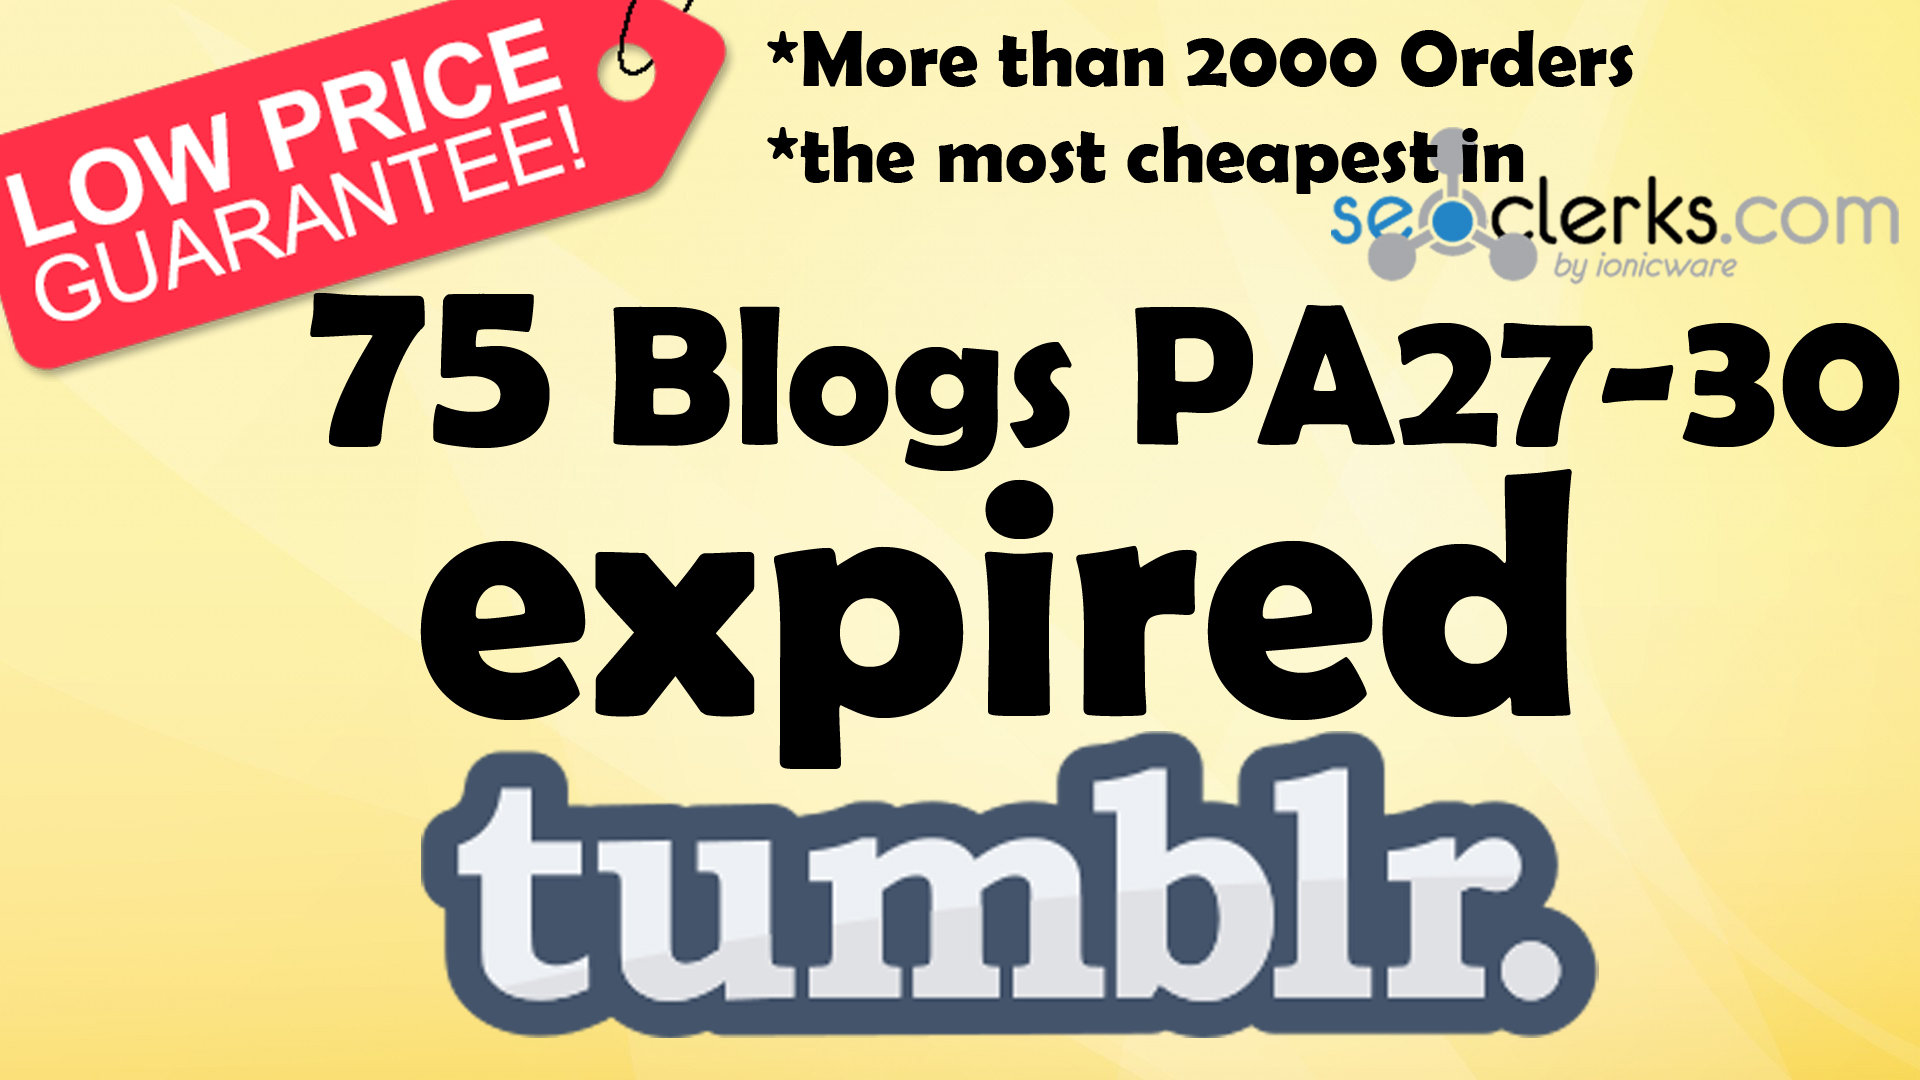 900+ Orders - I will provide 75 expired tumblr PA 27 -31